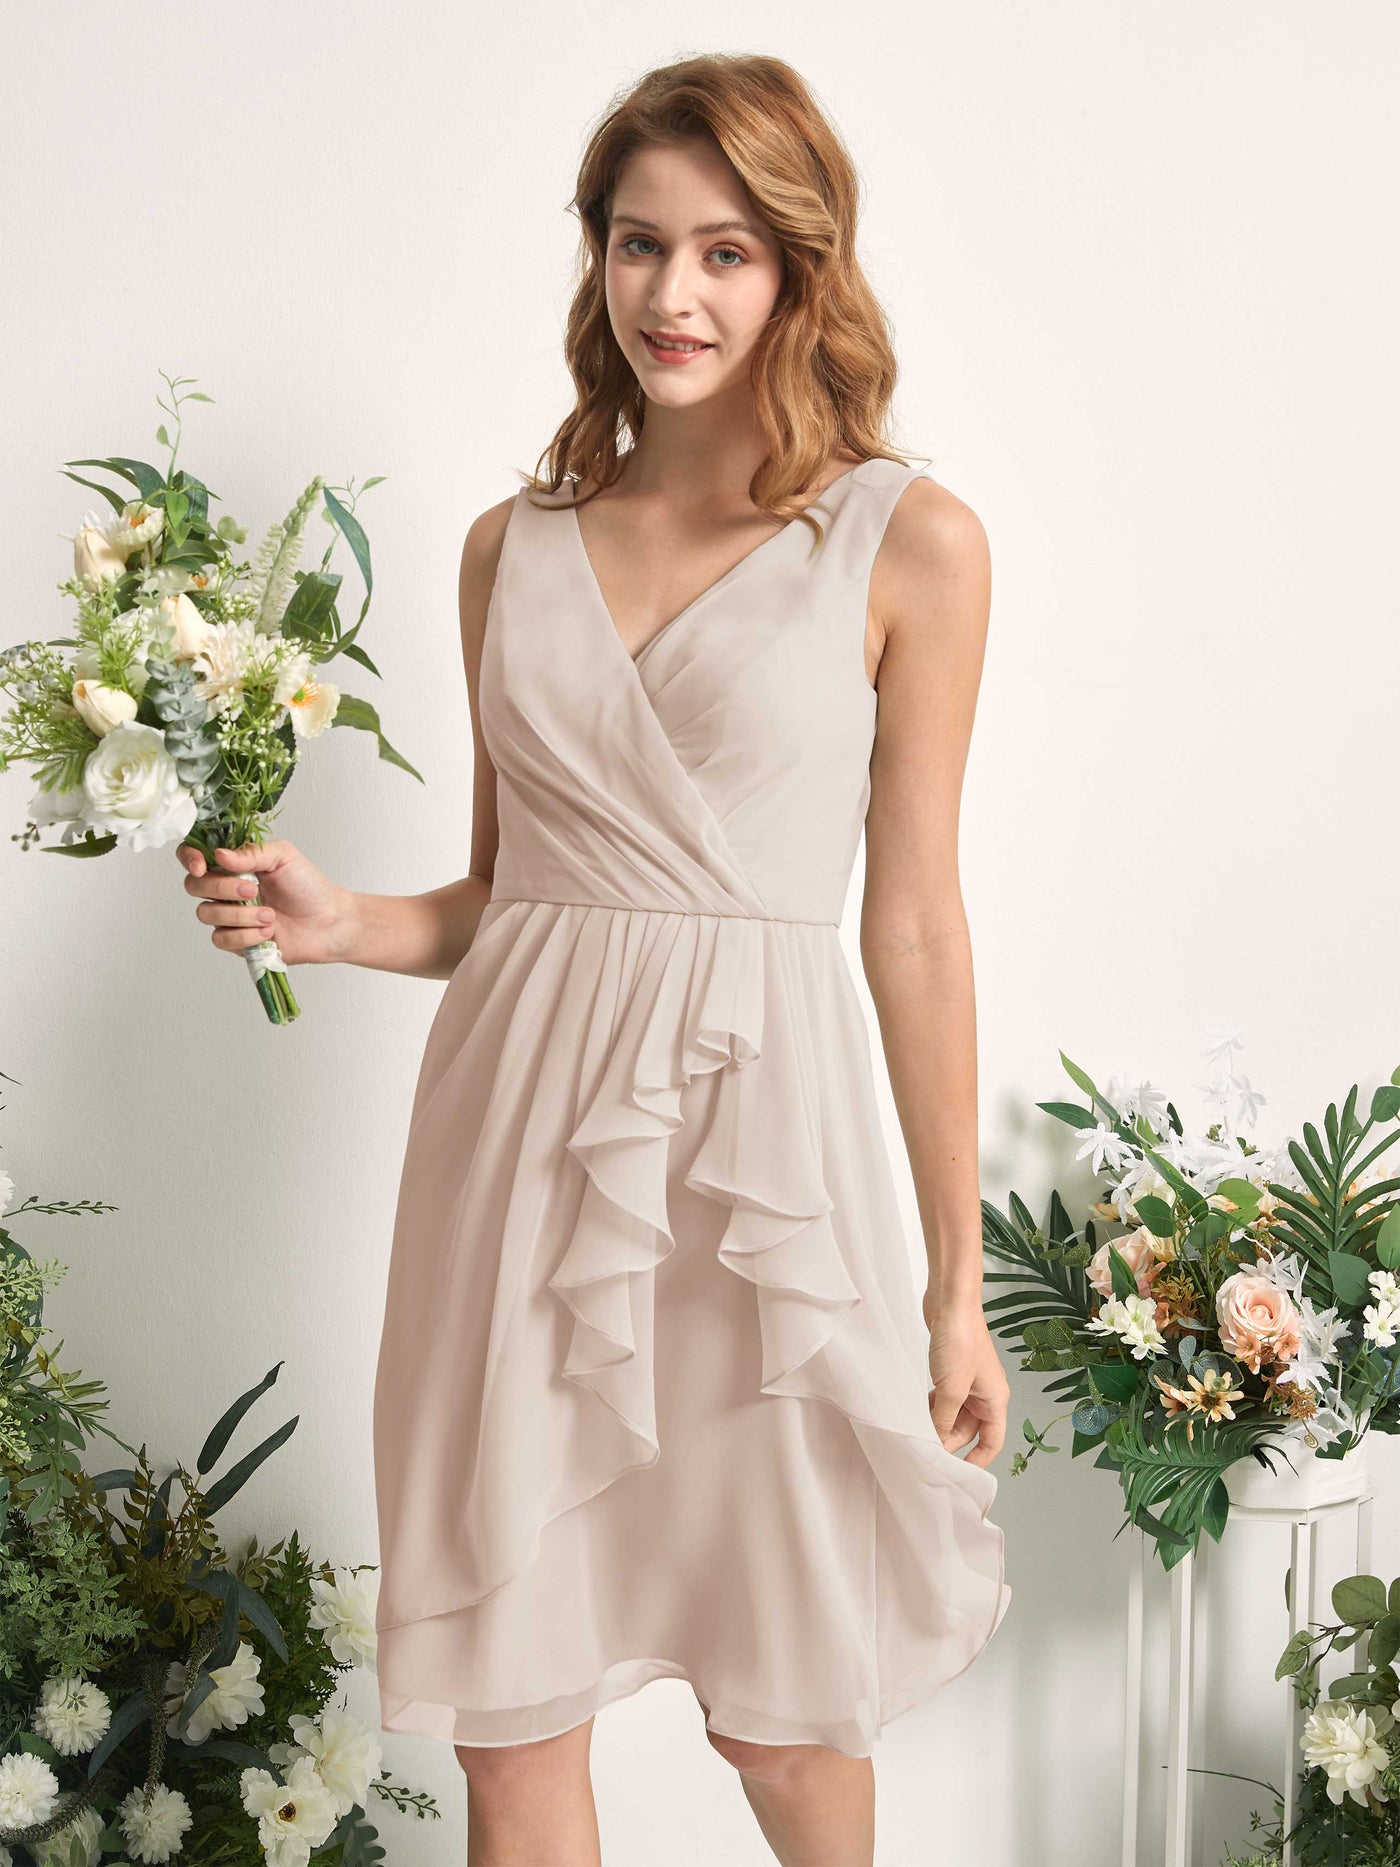 Bridesmaid Dress A-line Chiffon Straps Knee Length Sleeveless Wedding Party Dress - Champagne (81226616)#color_champagne